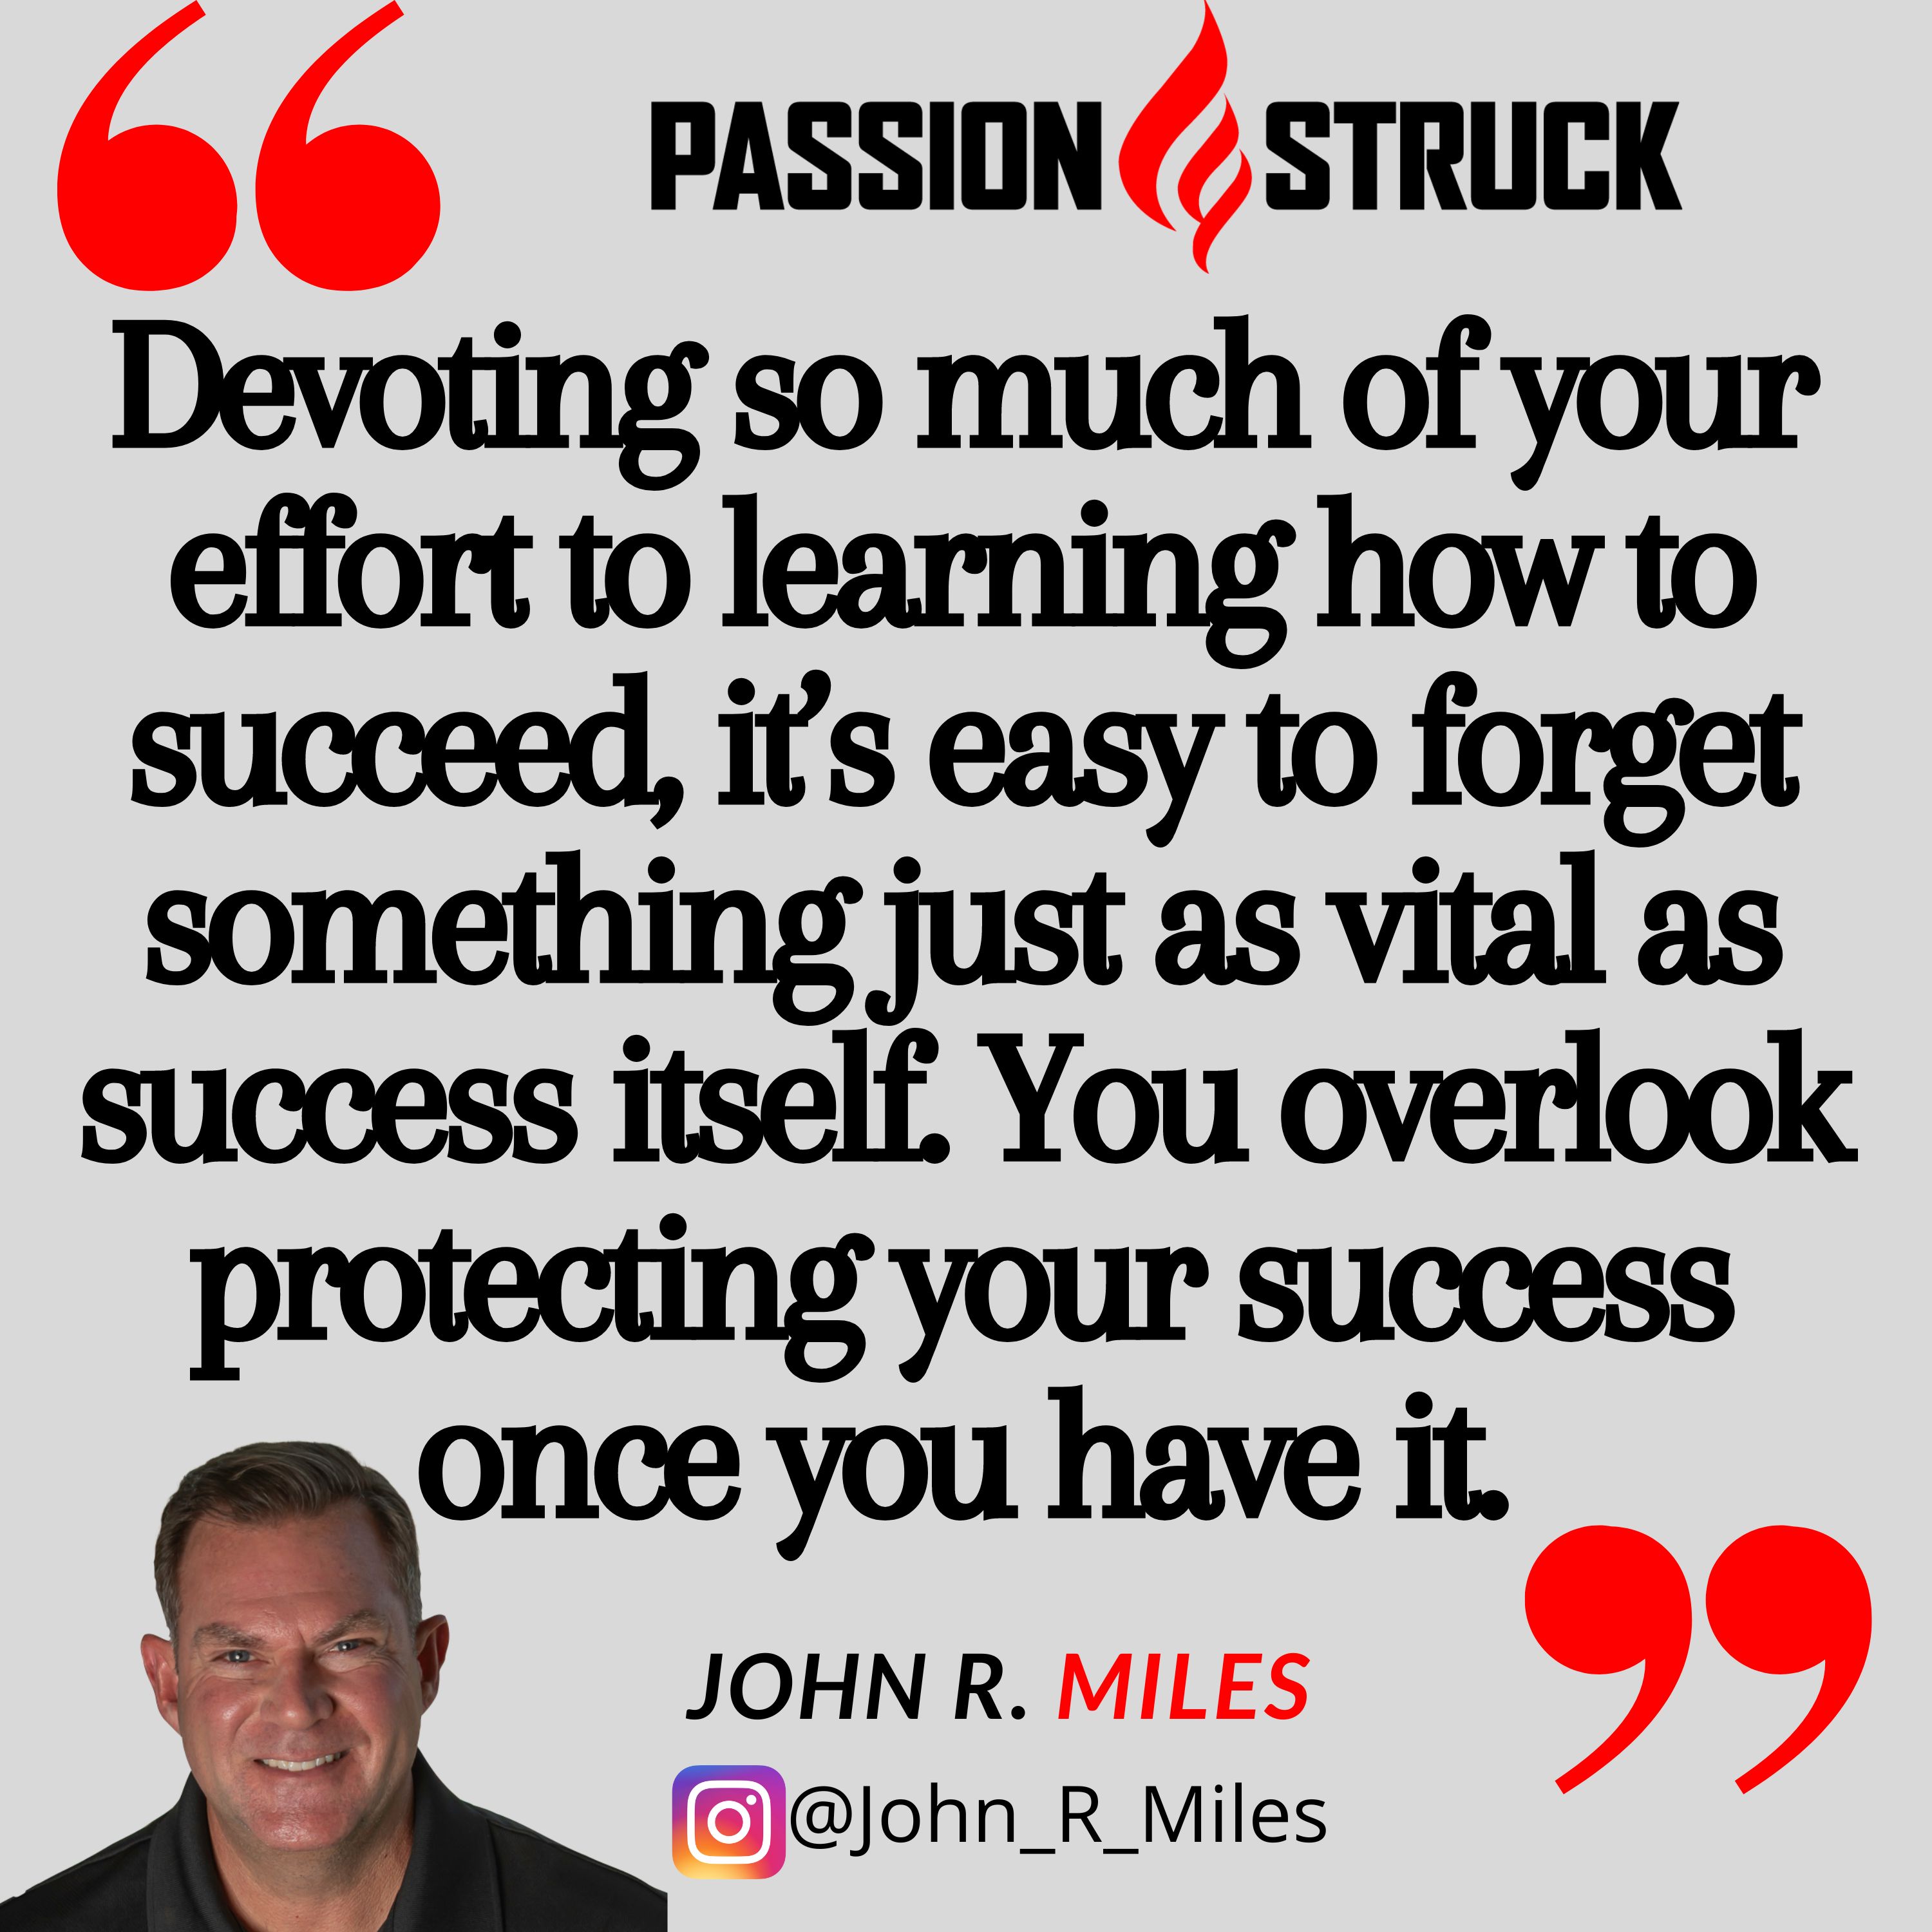 John R. Miles quote from the Passion Struck podcast on how to protect your success